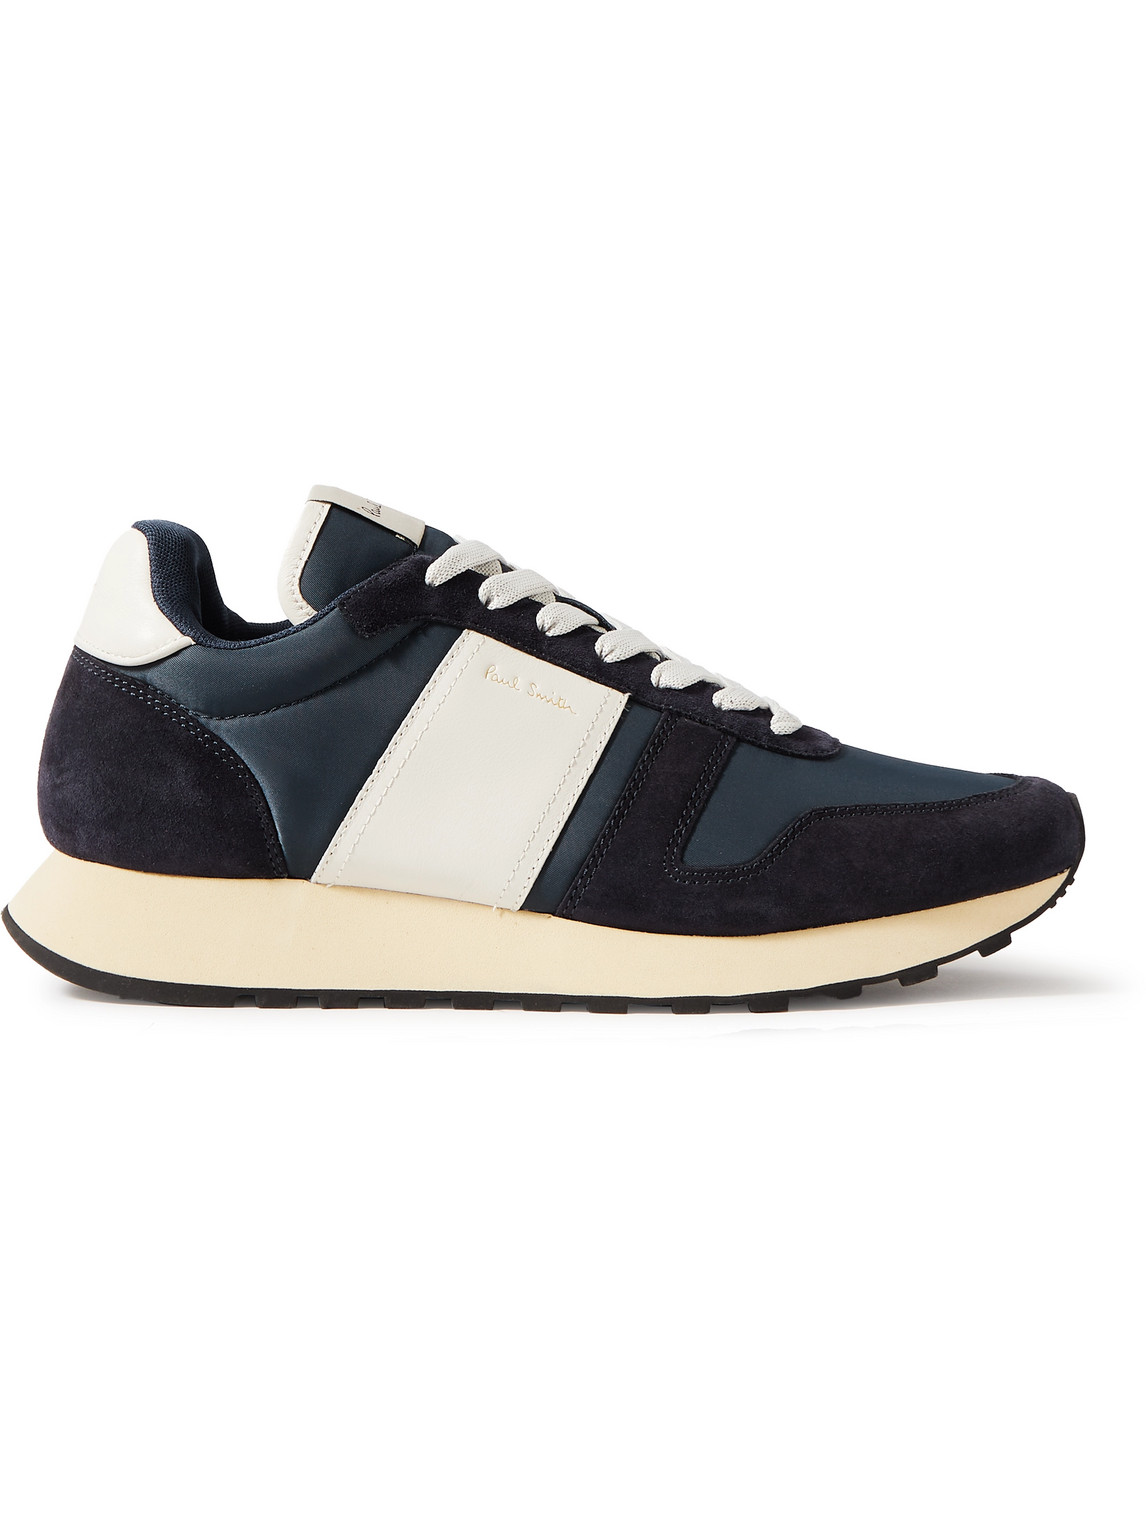 PAUL SMITH EIGHTIES SUEDE AND LEATHER SNEAKERS